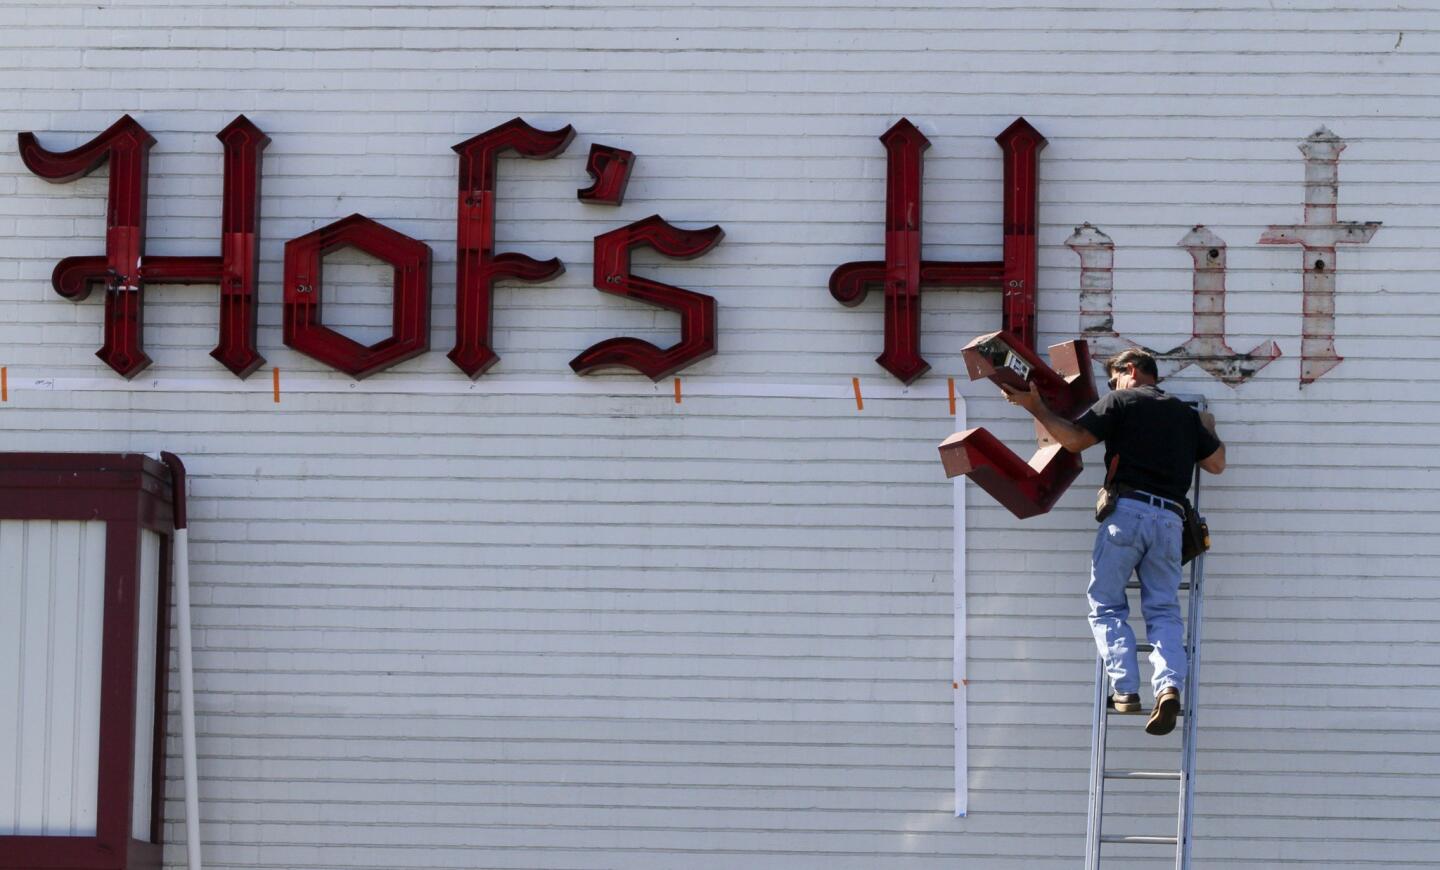 Mike Ciccarelli with ATC Signs starts removing the neon sign at Hof's Hut in the Long Beach Marina as the beloved coffee shop closes. Long known by locals for its comfort food and amazing pies, Hof's is being squeezed out by a strip mall that is being remodeled and gentrified.